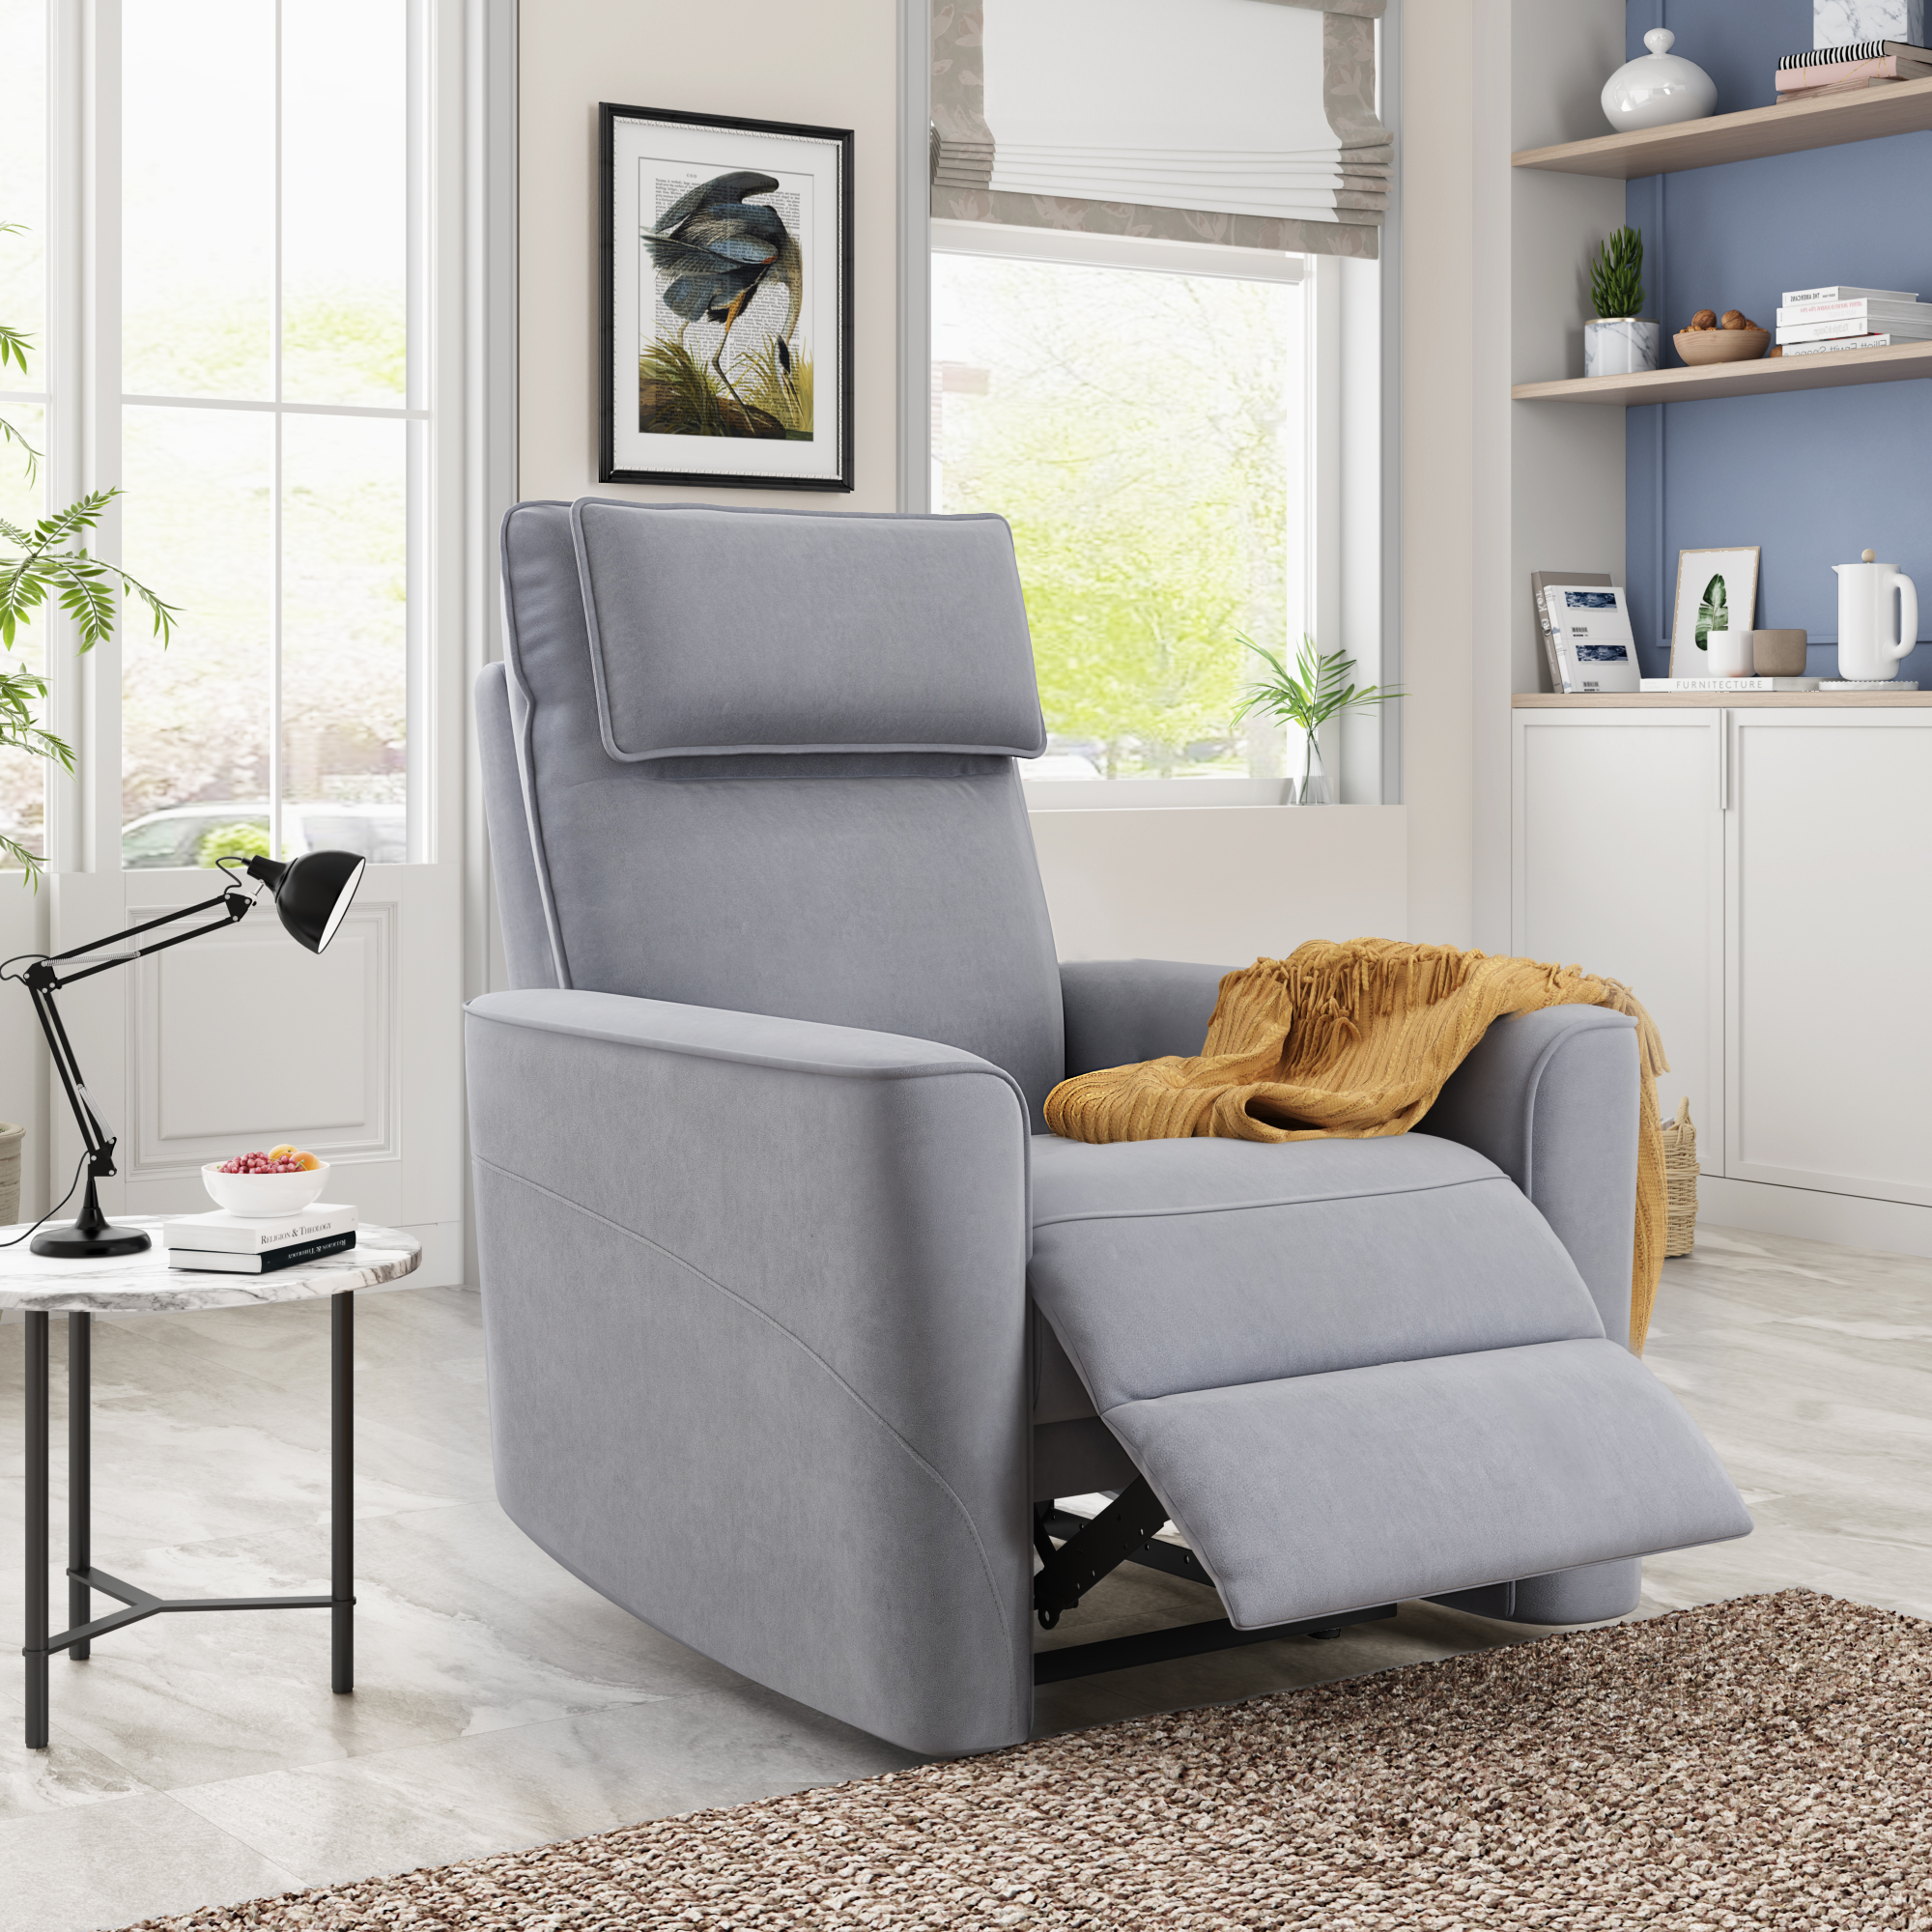 Recliner Chair with Padded Seat - SG000182AAA